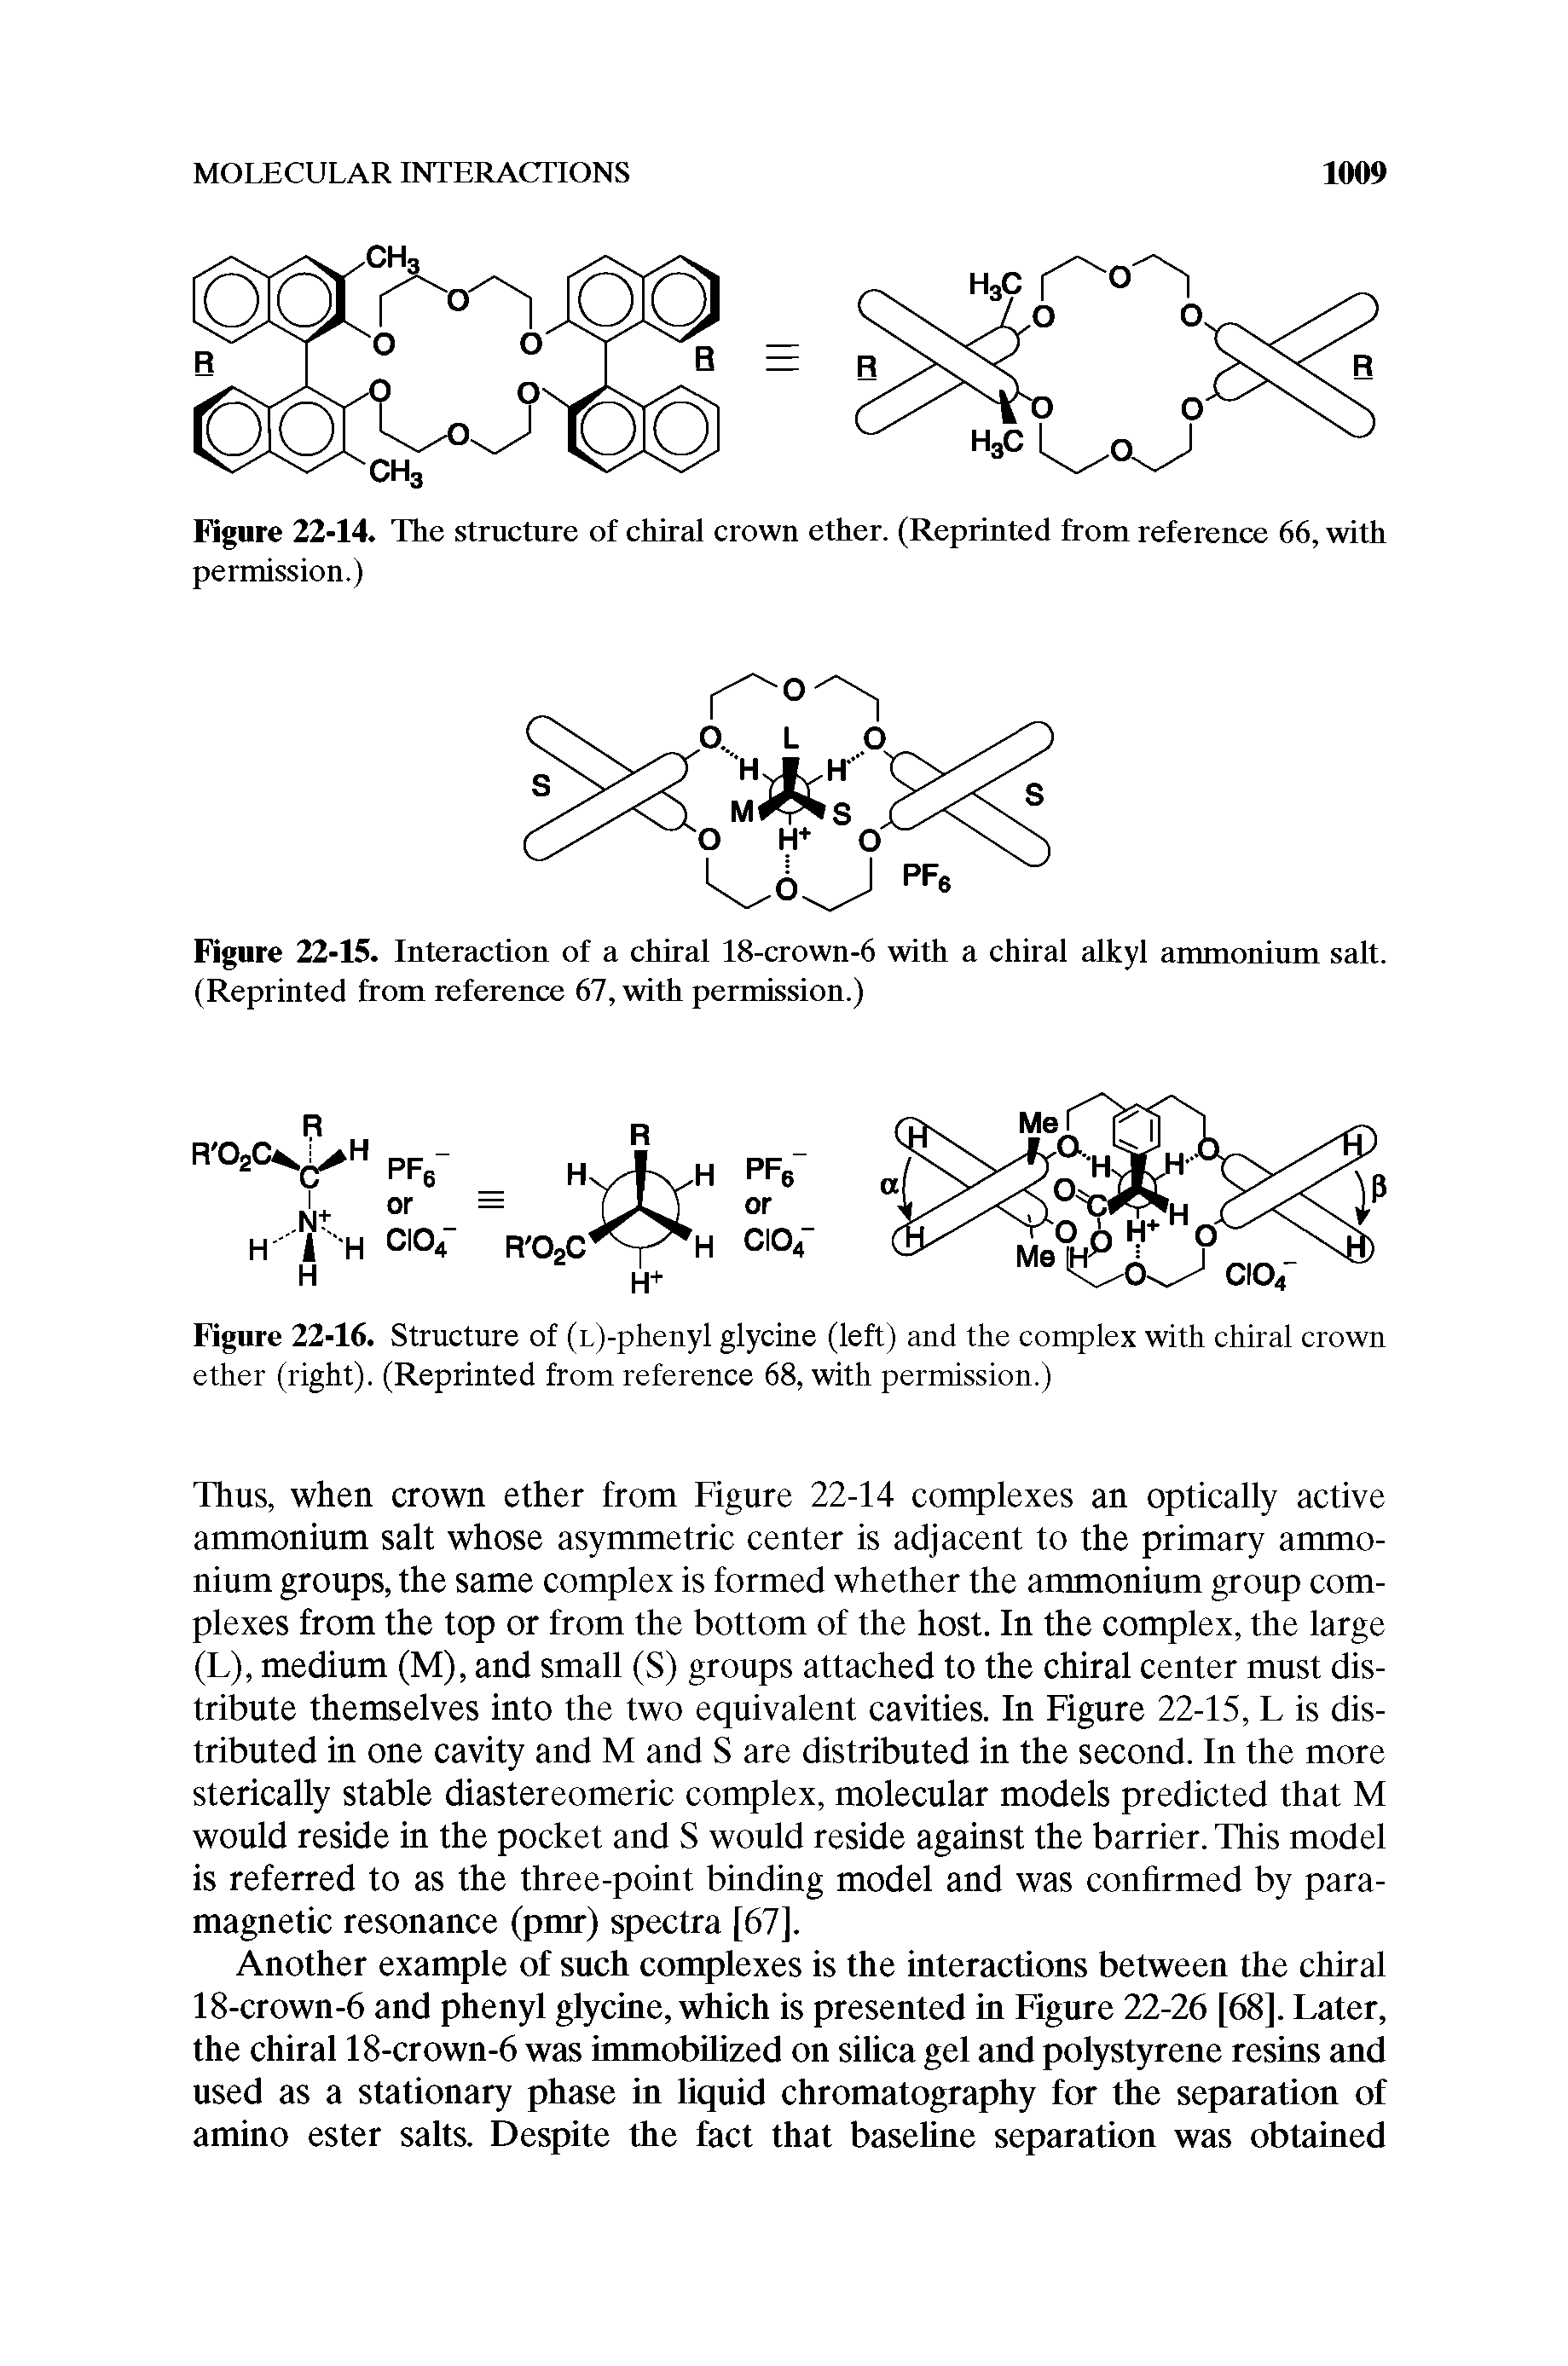 Figure 22-16. Structure of (L)-phenyl glycine (left) and the complex with chiral crown ether (right). (Reprinted from reference 68, with permission.)...